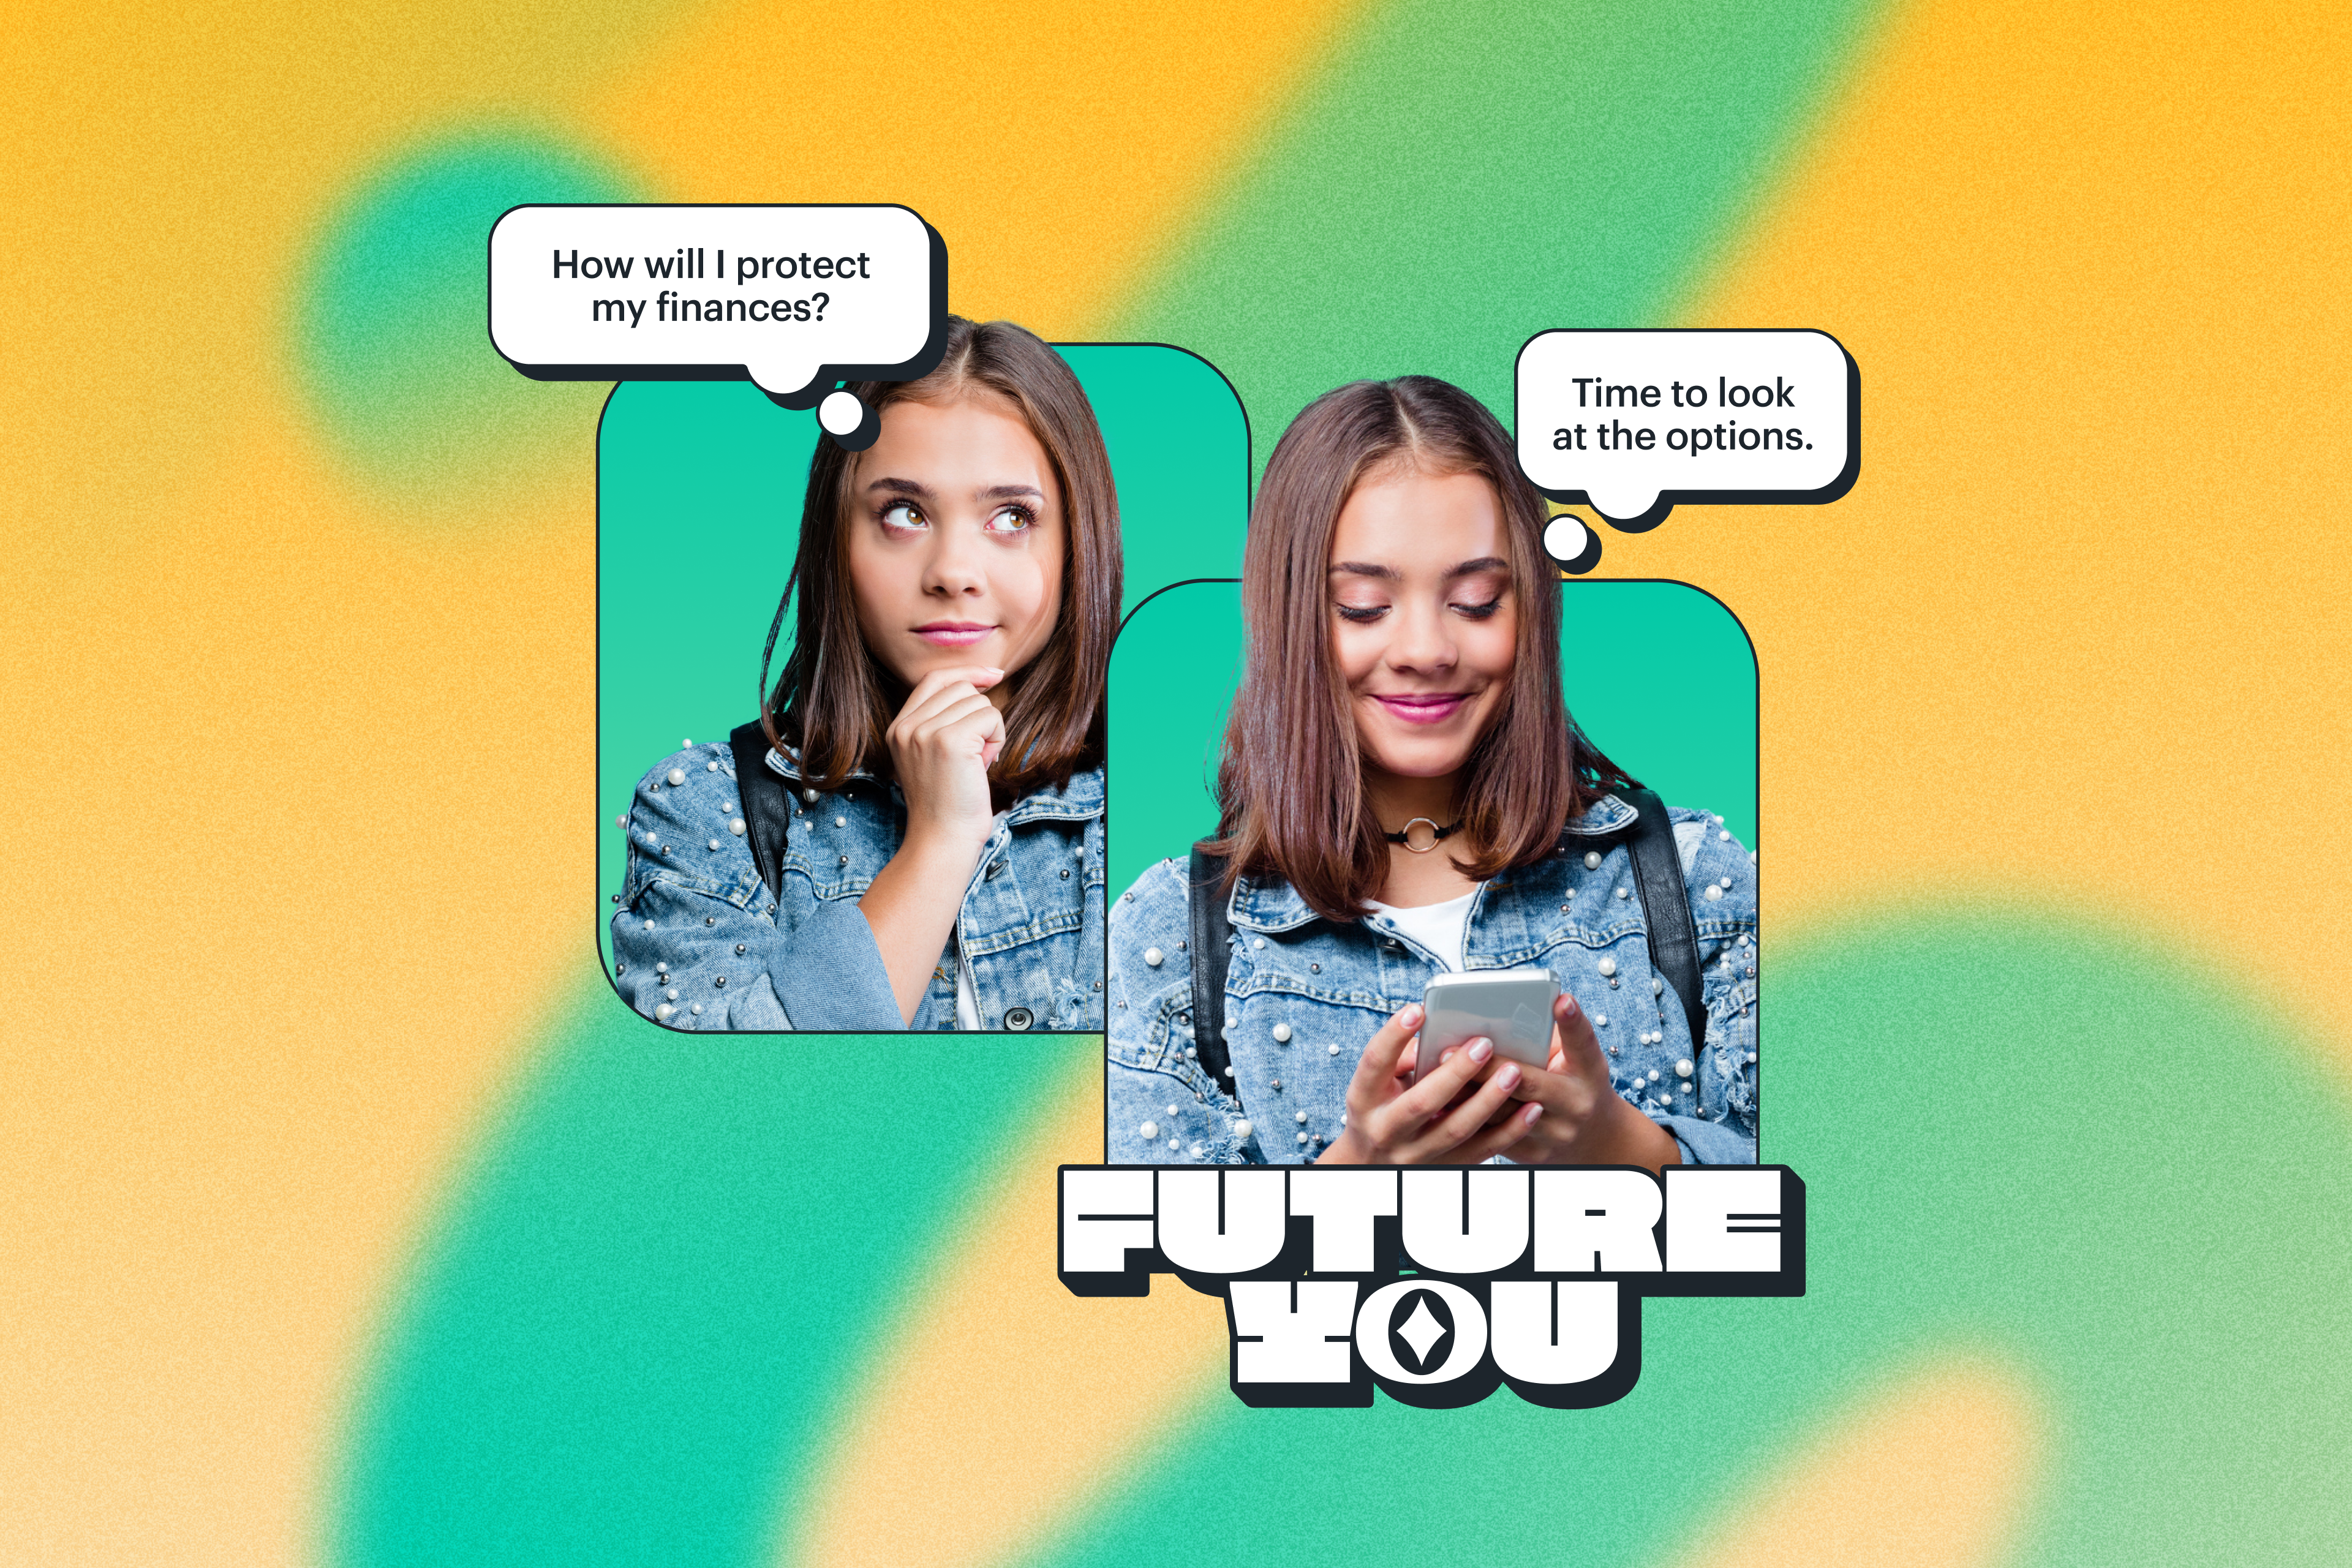 Future You: How will you protect your finances?